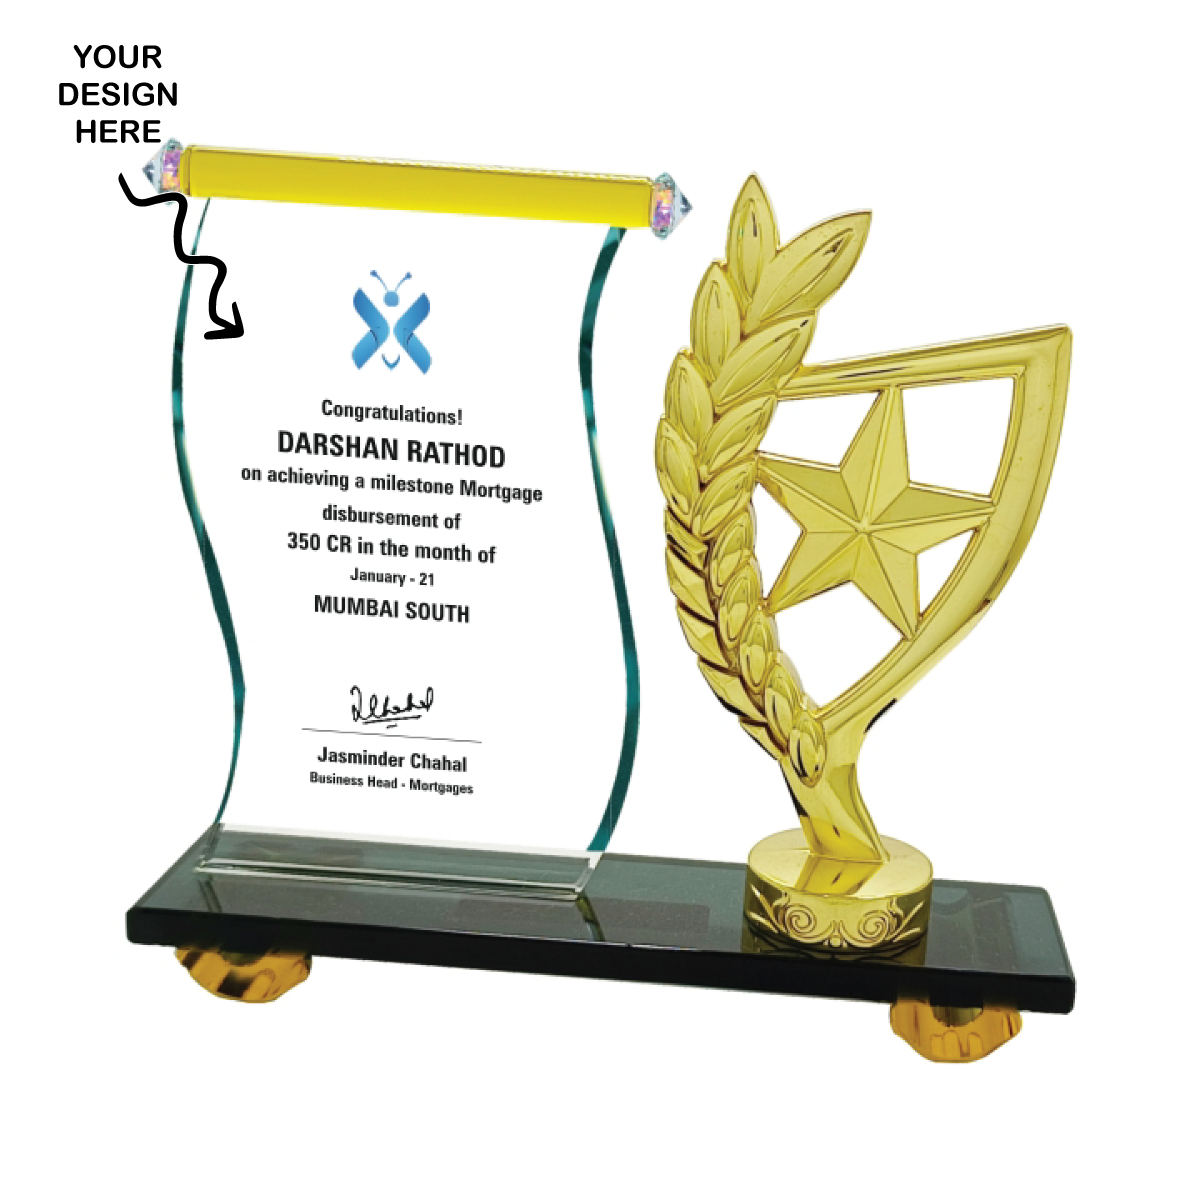 Personalized Starfish Crystal Award Trophy - For Employee Recognition, Corporate Gifting, Award Shows, Sports Event, Competition, Students Reward - MA495